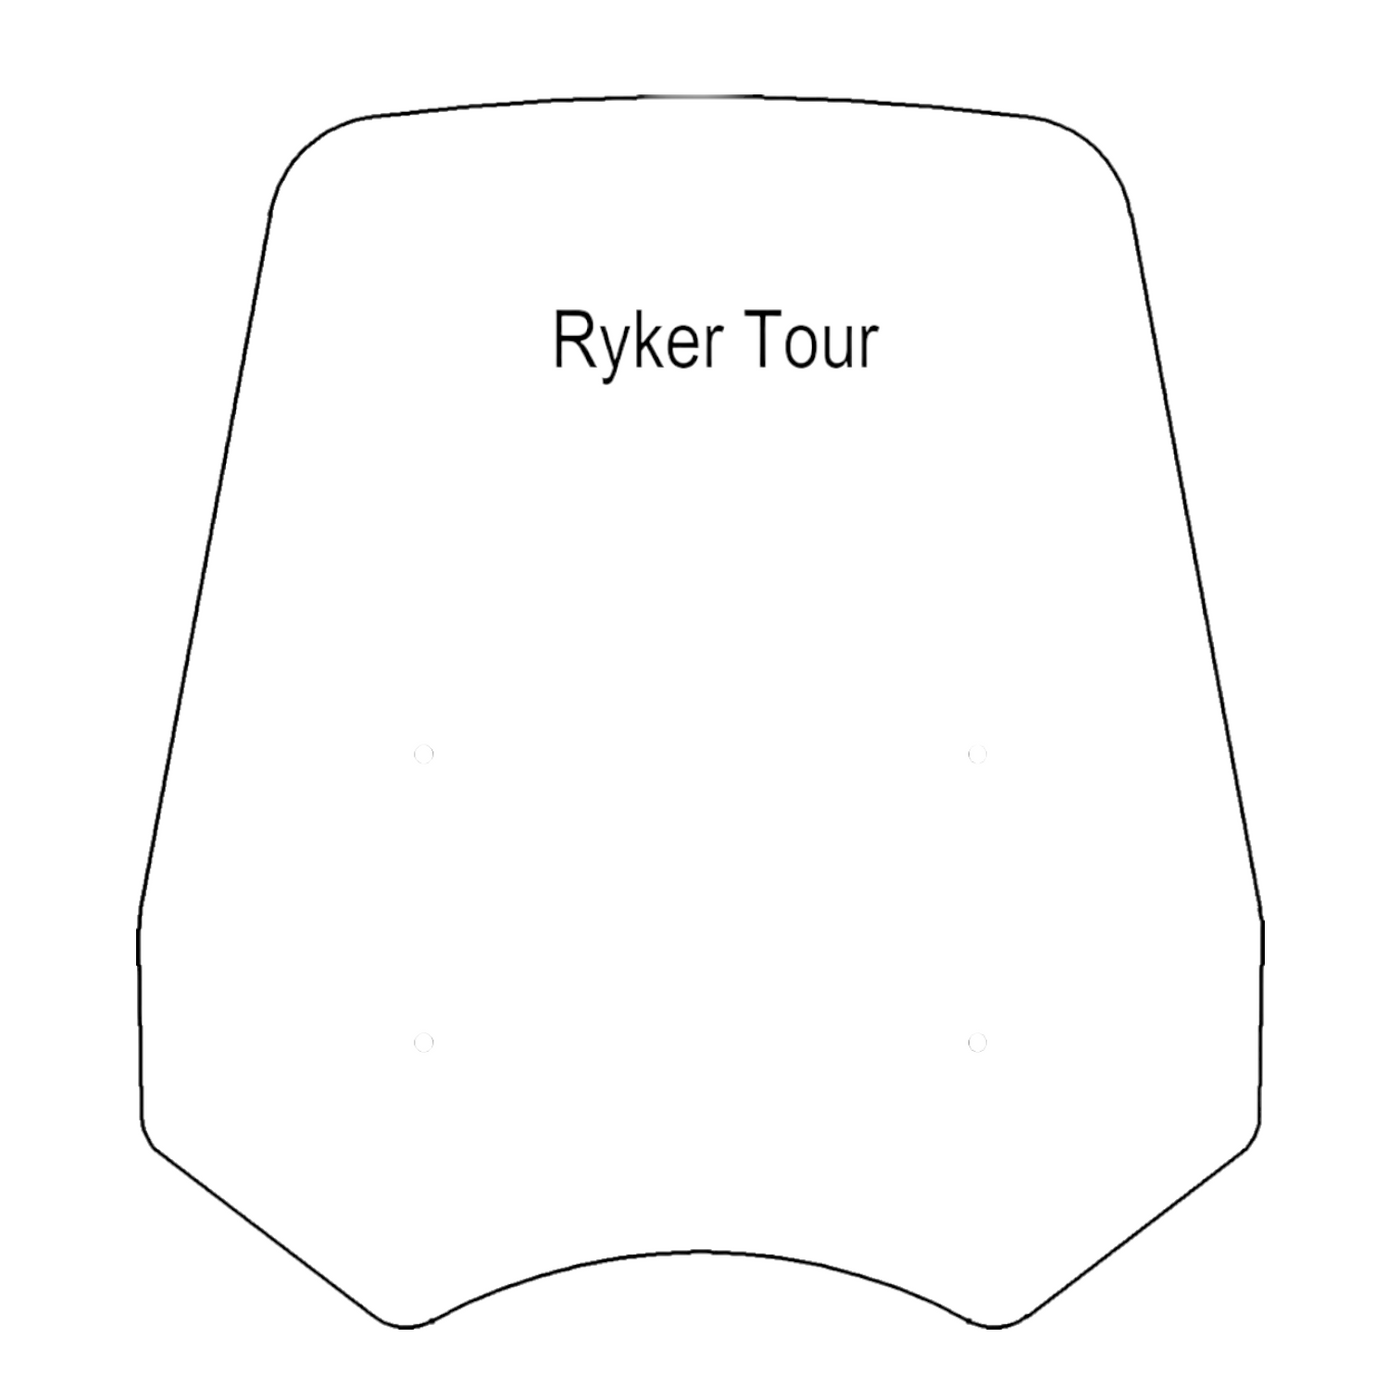 Windshield ONLY - Replacement Windshield for Madstad System for Can-Am Ryker Tour